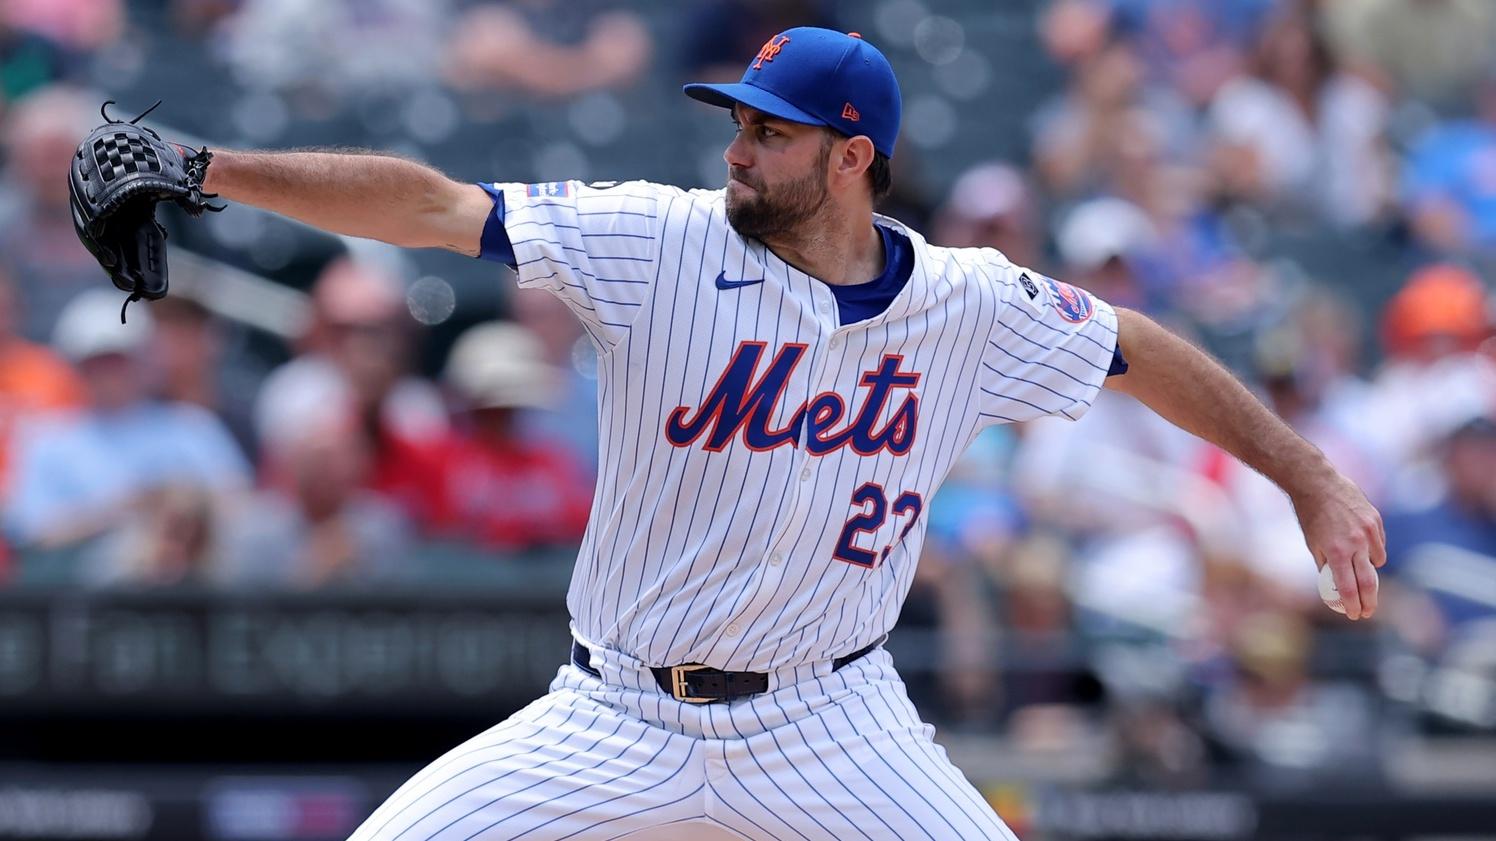 Mets give up four home runs in 9-2 loss to Braves, splitting four-game series